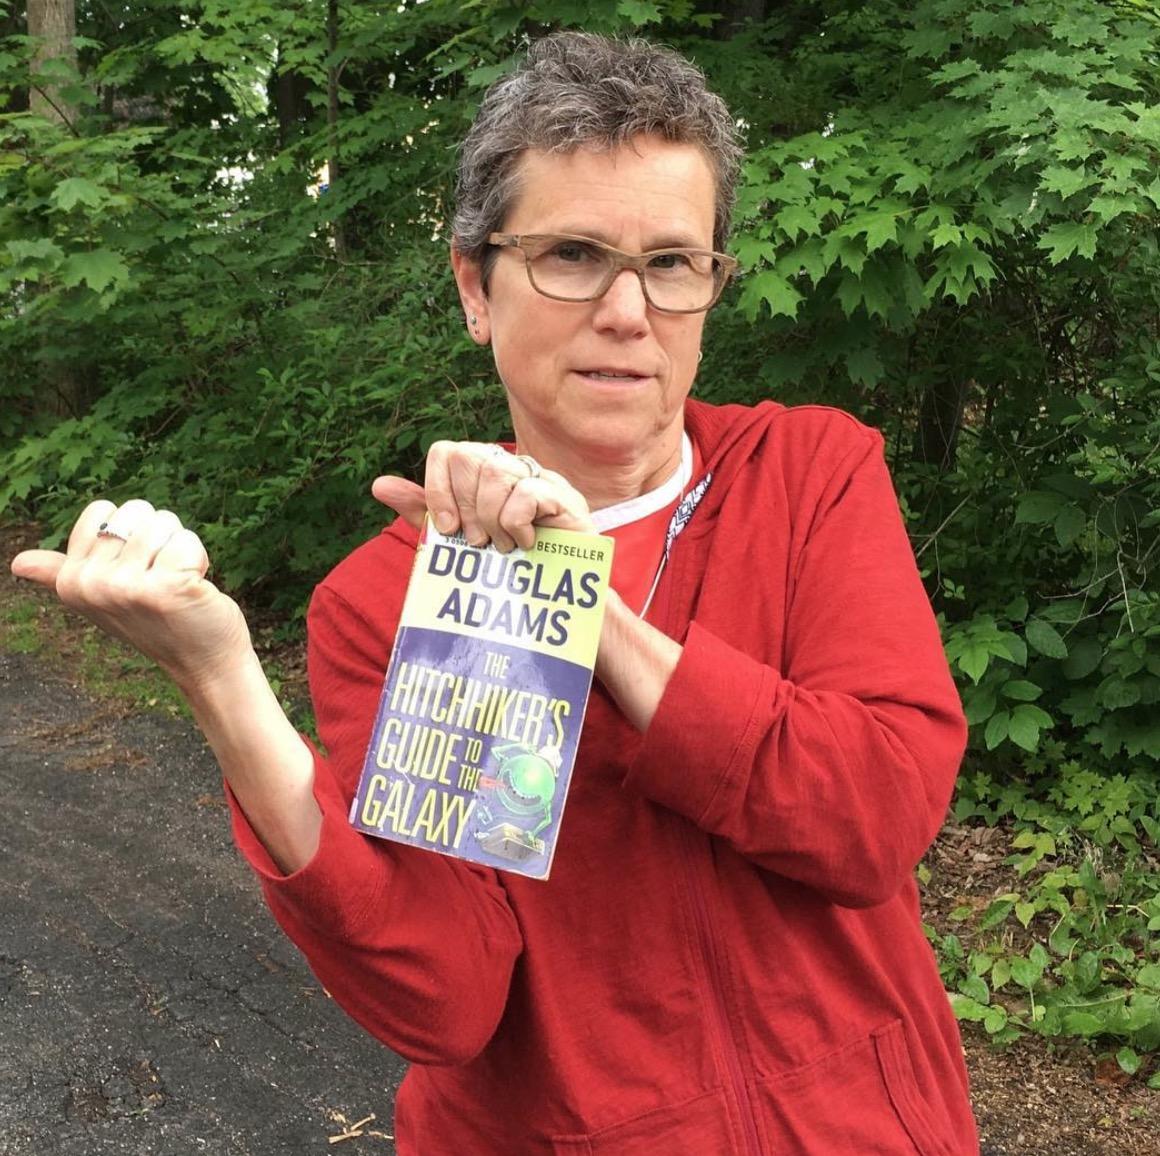 Julia Chevan jokingly hitchhikes while holding a copy of Hitchhikers Guide to the Galaxy